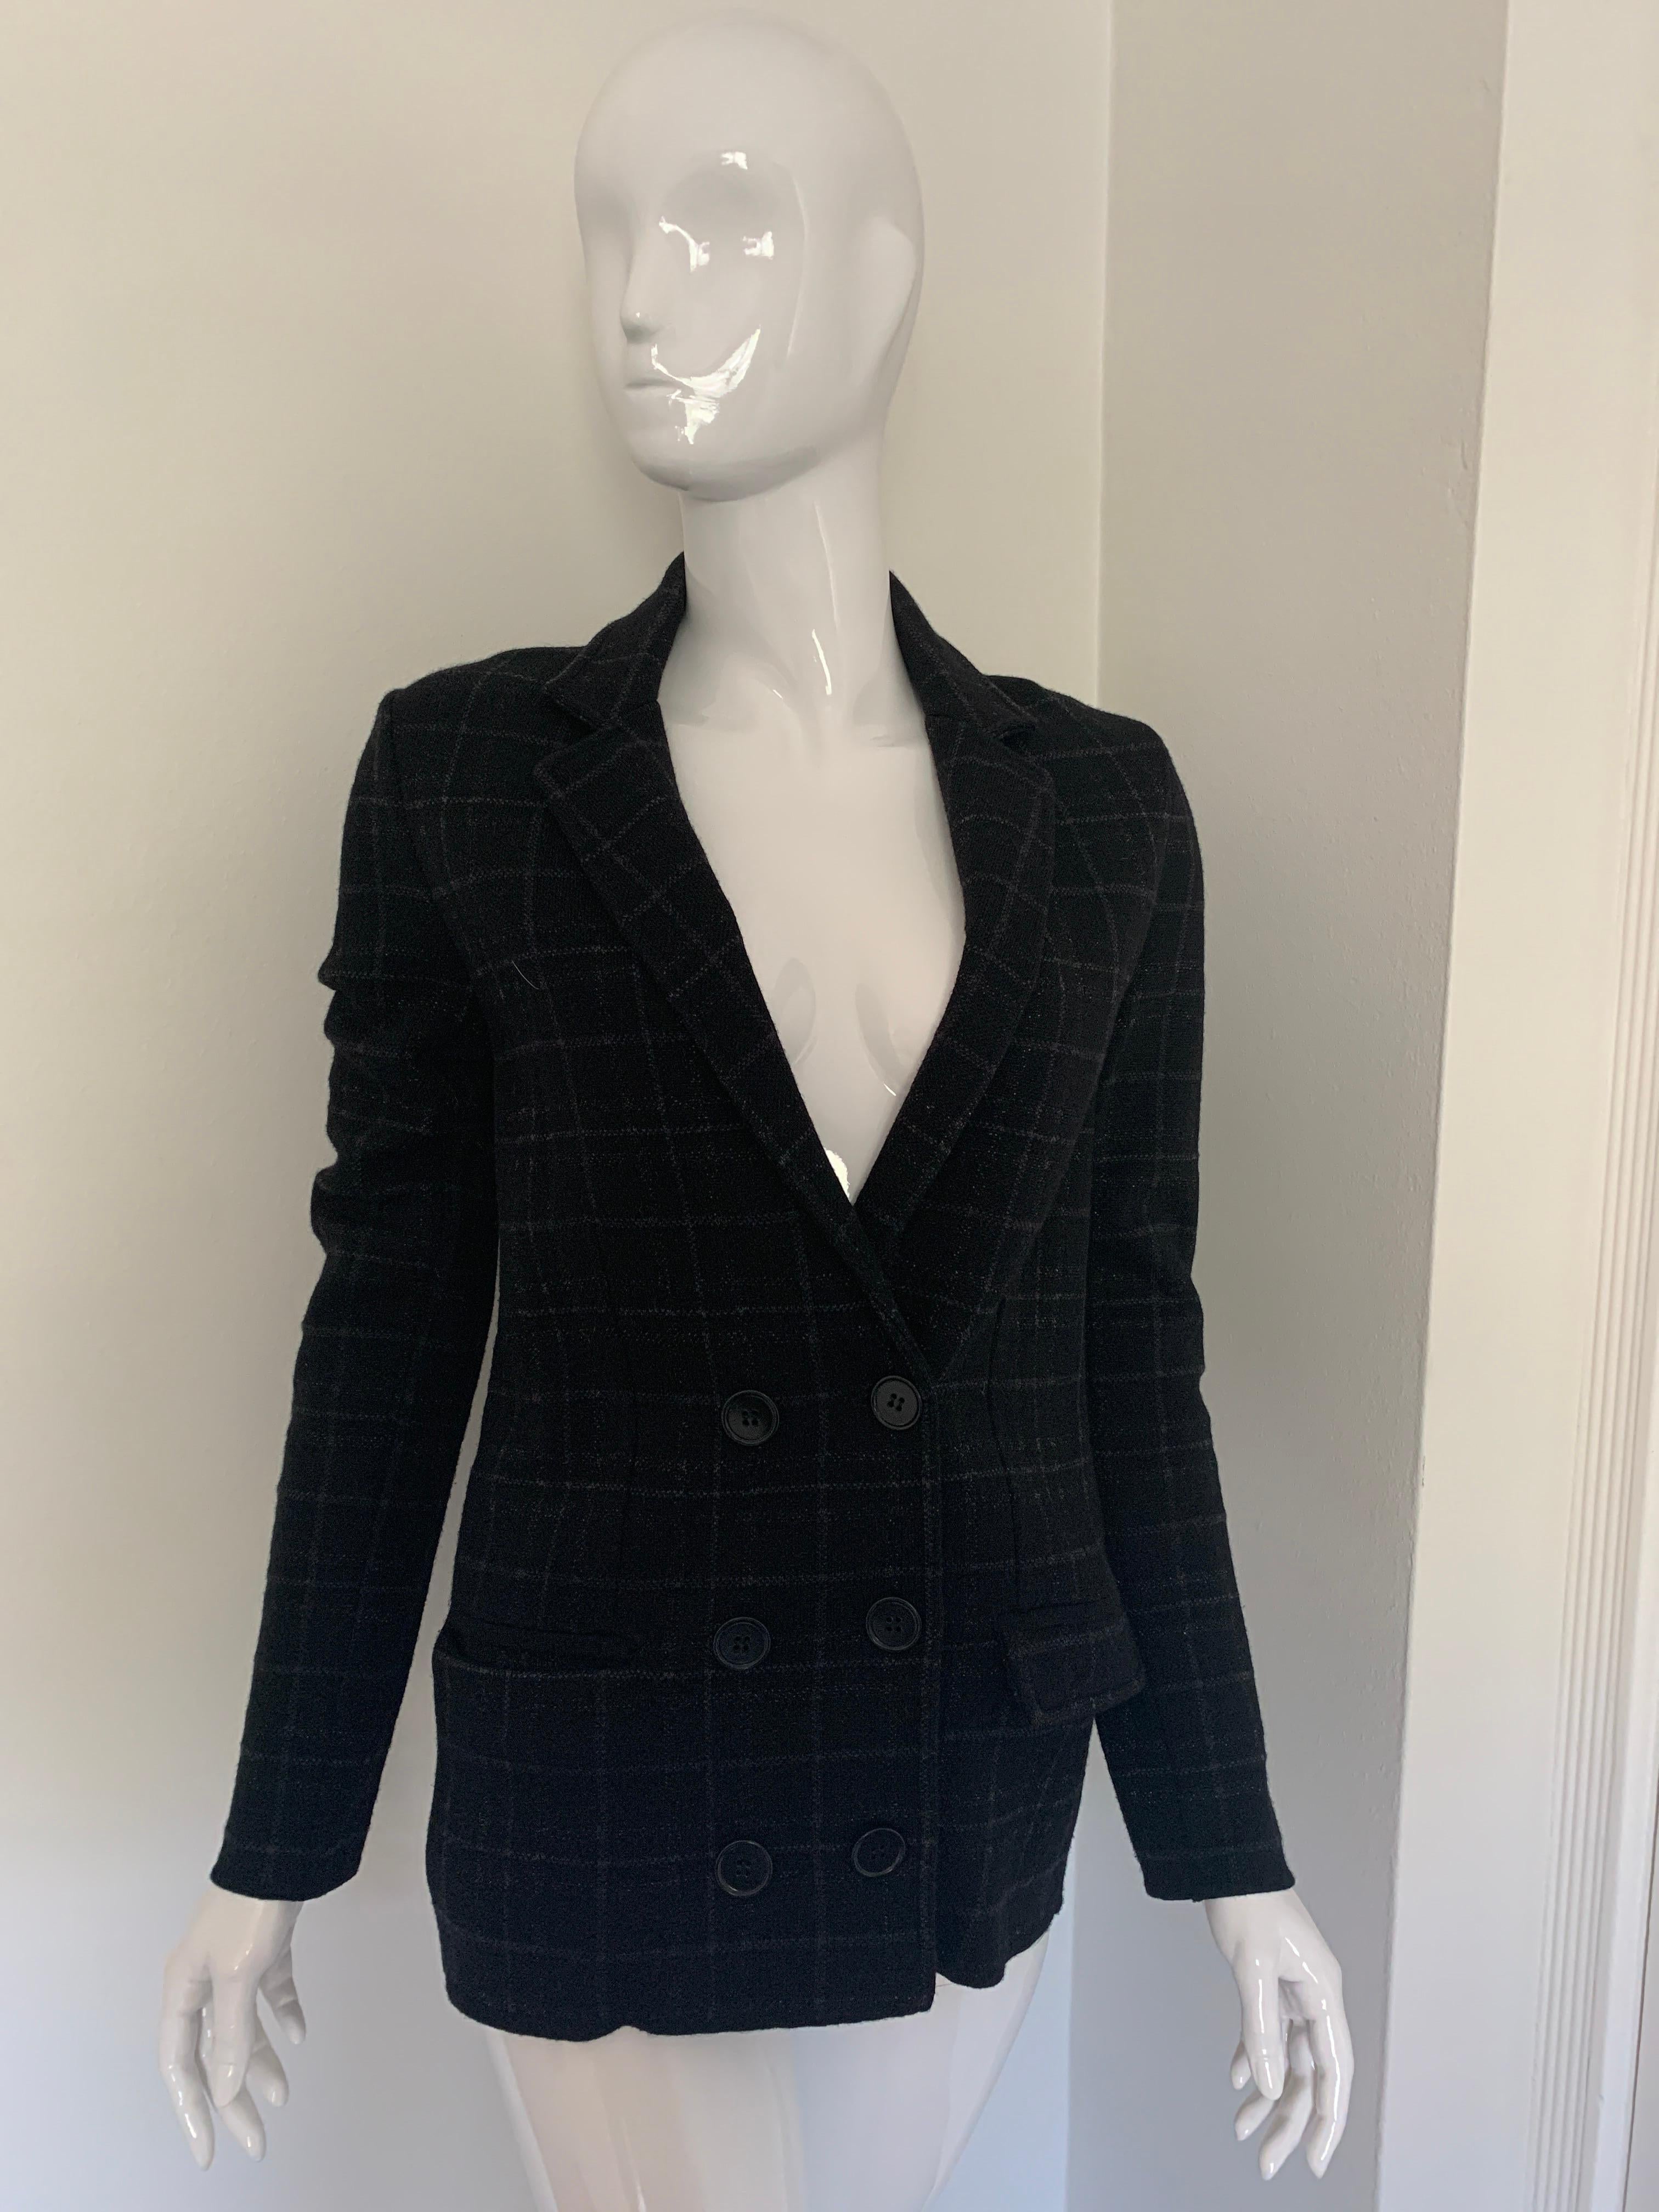 Beautiful, classic Bottega Veneta Double-Breasted Blazer. 
Black/ Charcoal with white striping. 
Deep V Neck - 6 Buttons 
Hits Mid-Thigh 
Size 40 
Made in Italy
Excellent Condition 

Retails for over $1500 